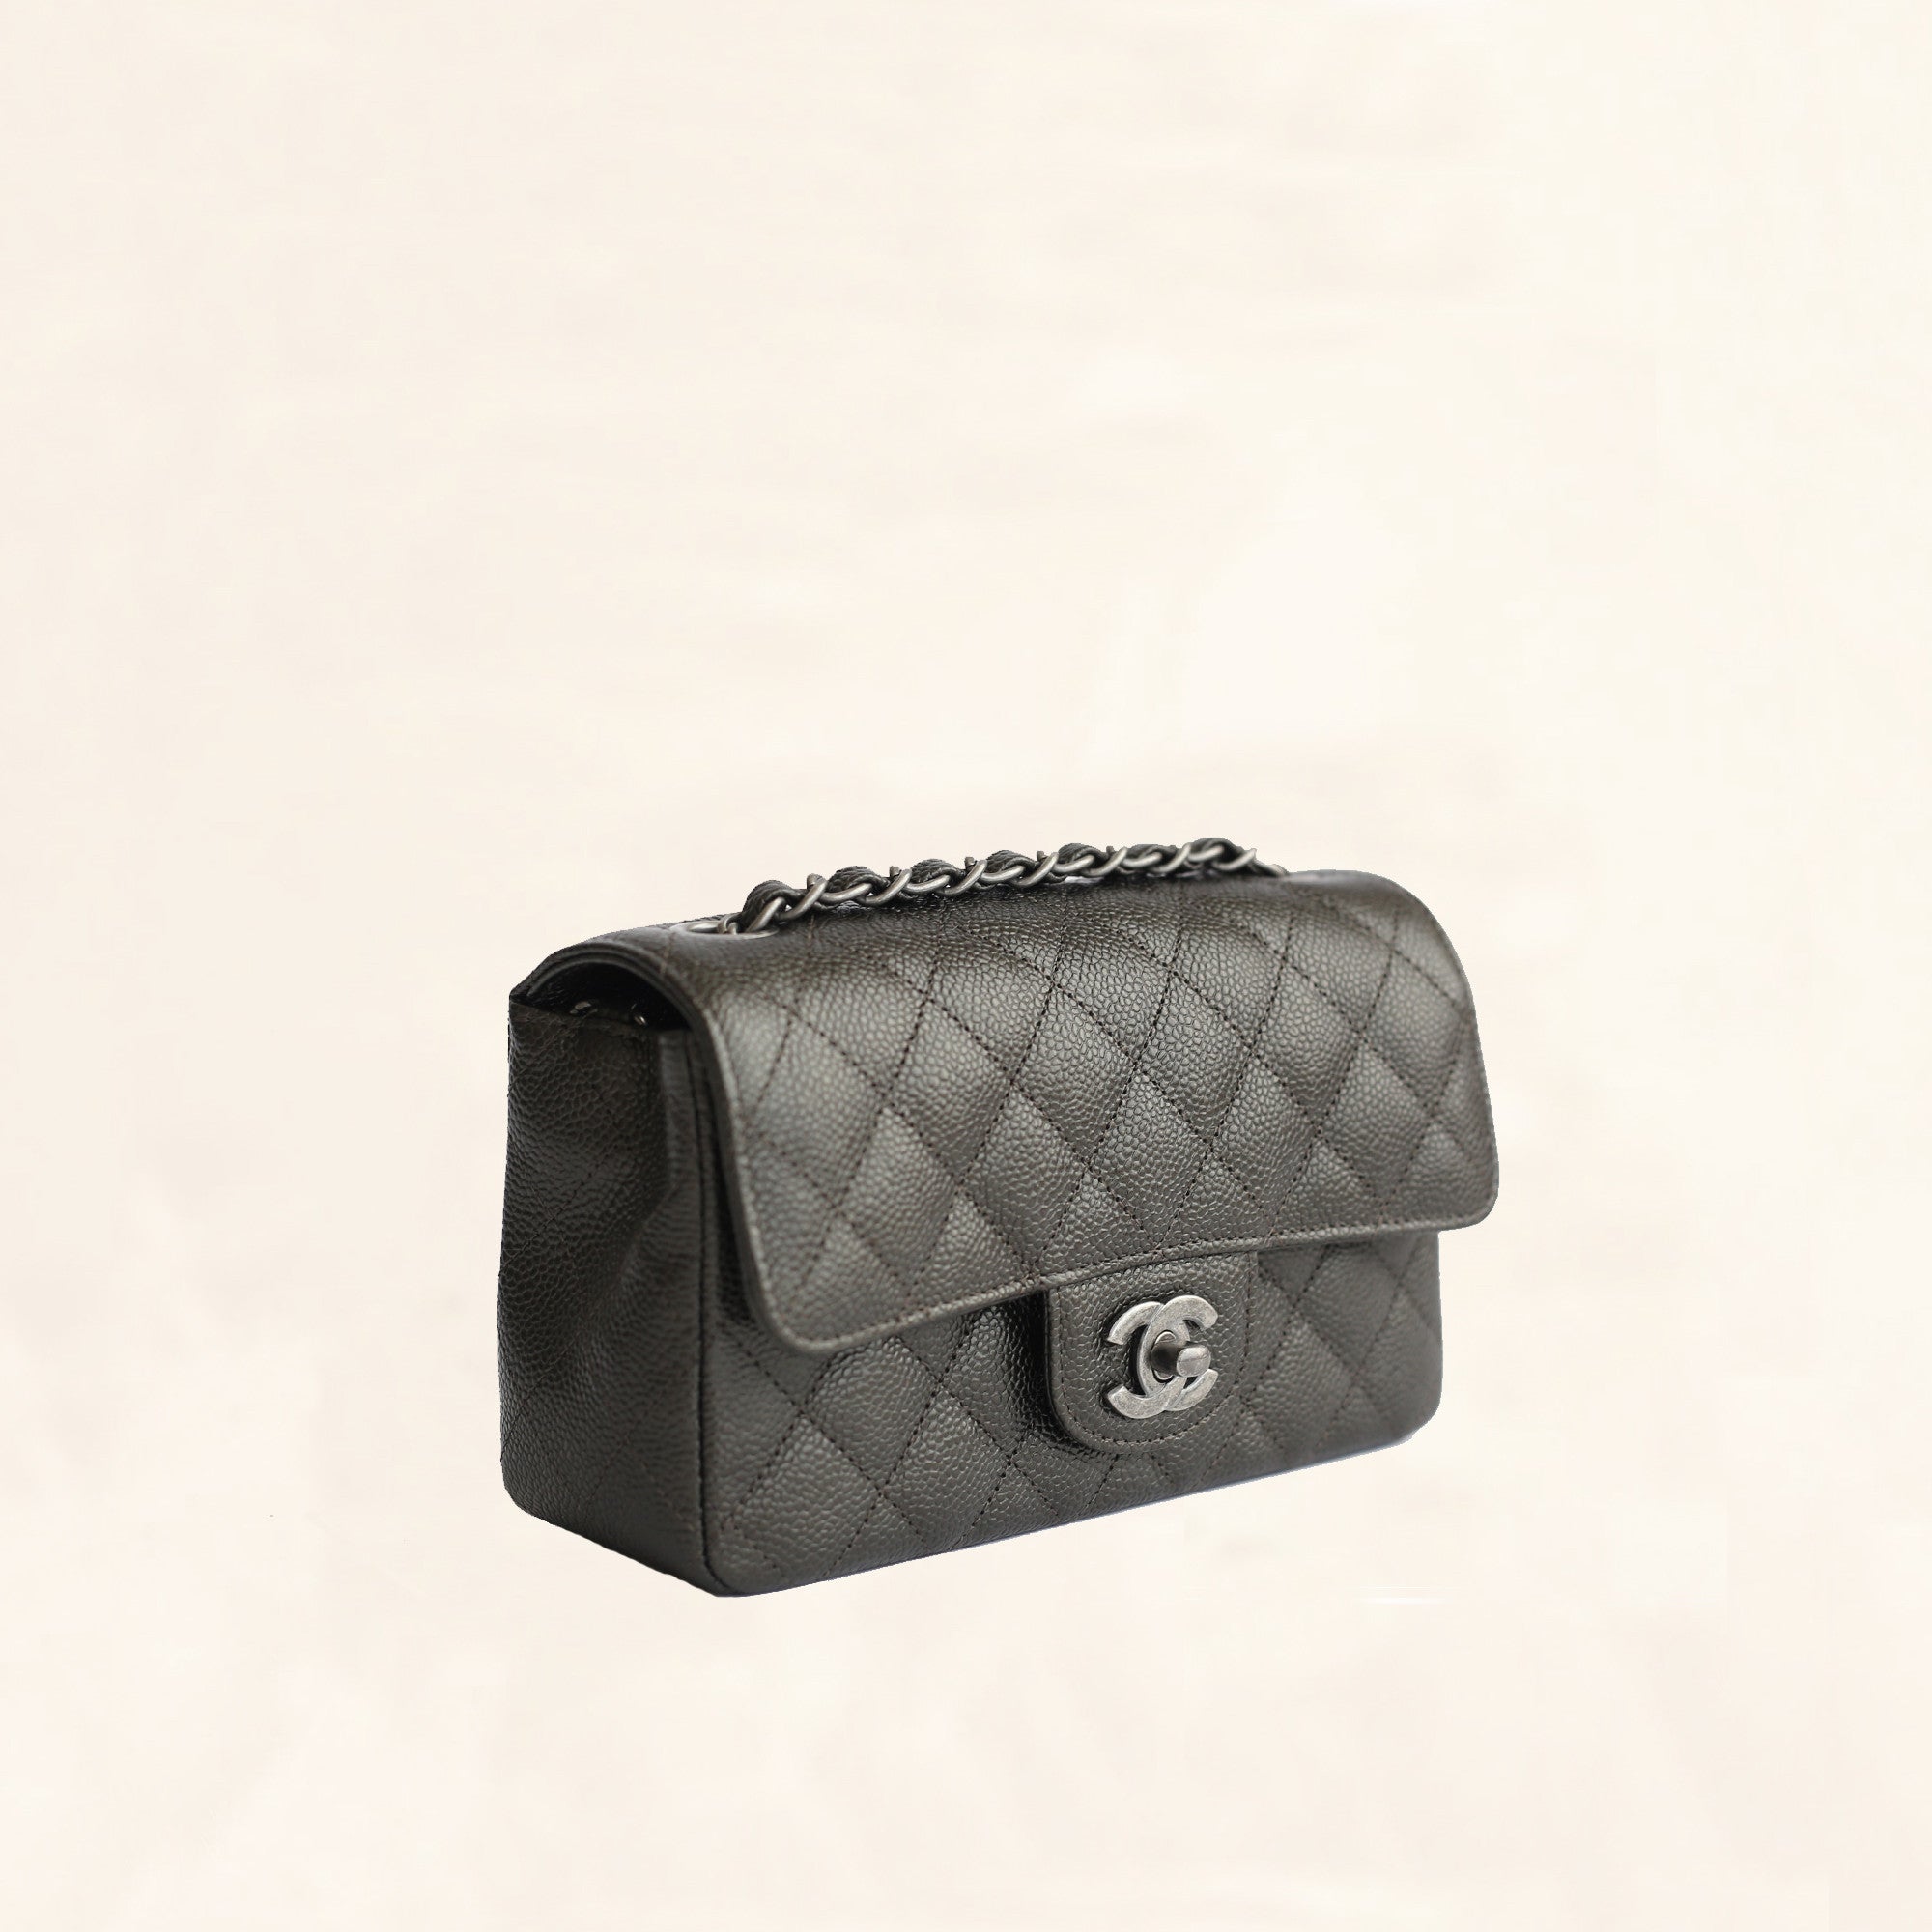 Chanel Dark Navy Quilted Calfskin Small Gentle Square Boy Flap Bag